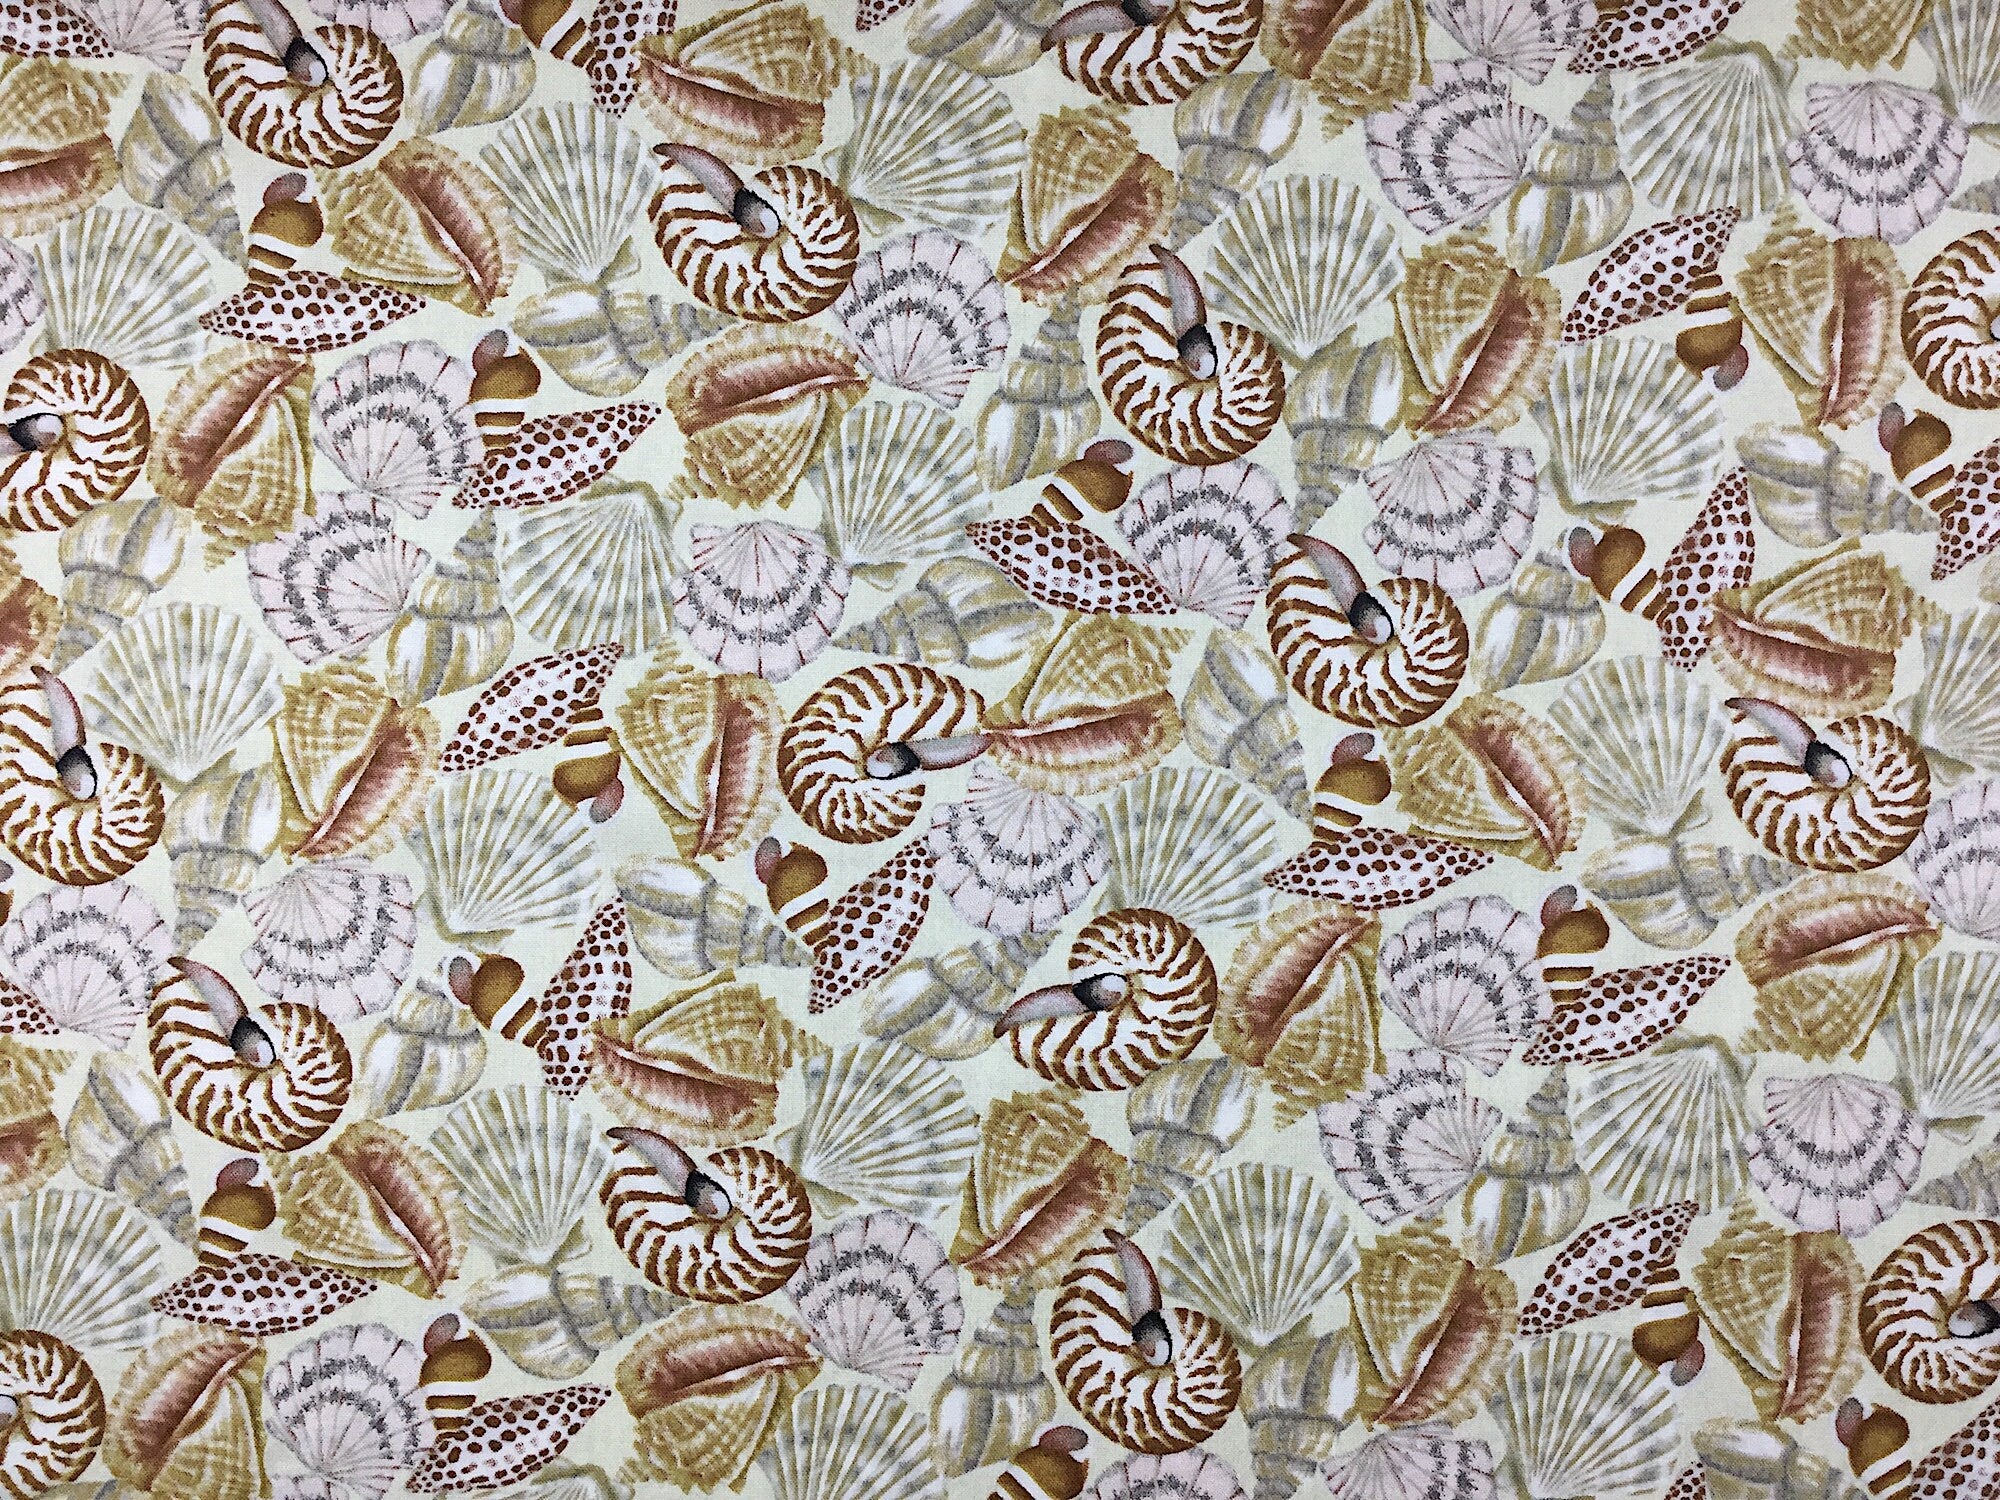 This fabric is called Seaside Dreams and is covered with seashells in shades of brown, tan, and grey on a off white background.